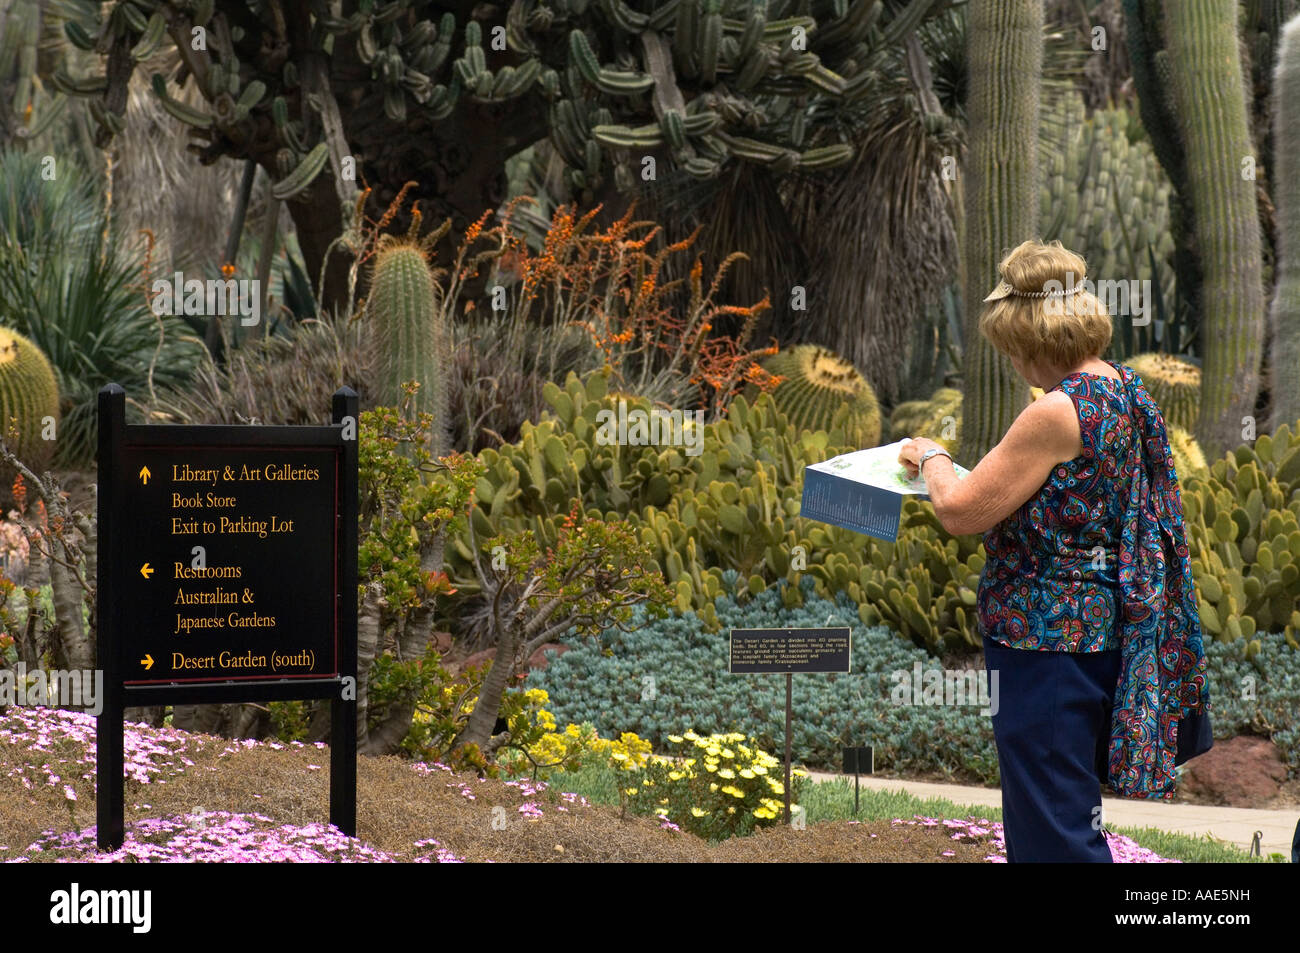 Elderly Woman Looking For Directions On The Map Of Botanical